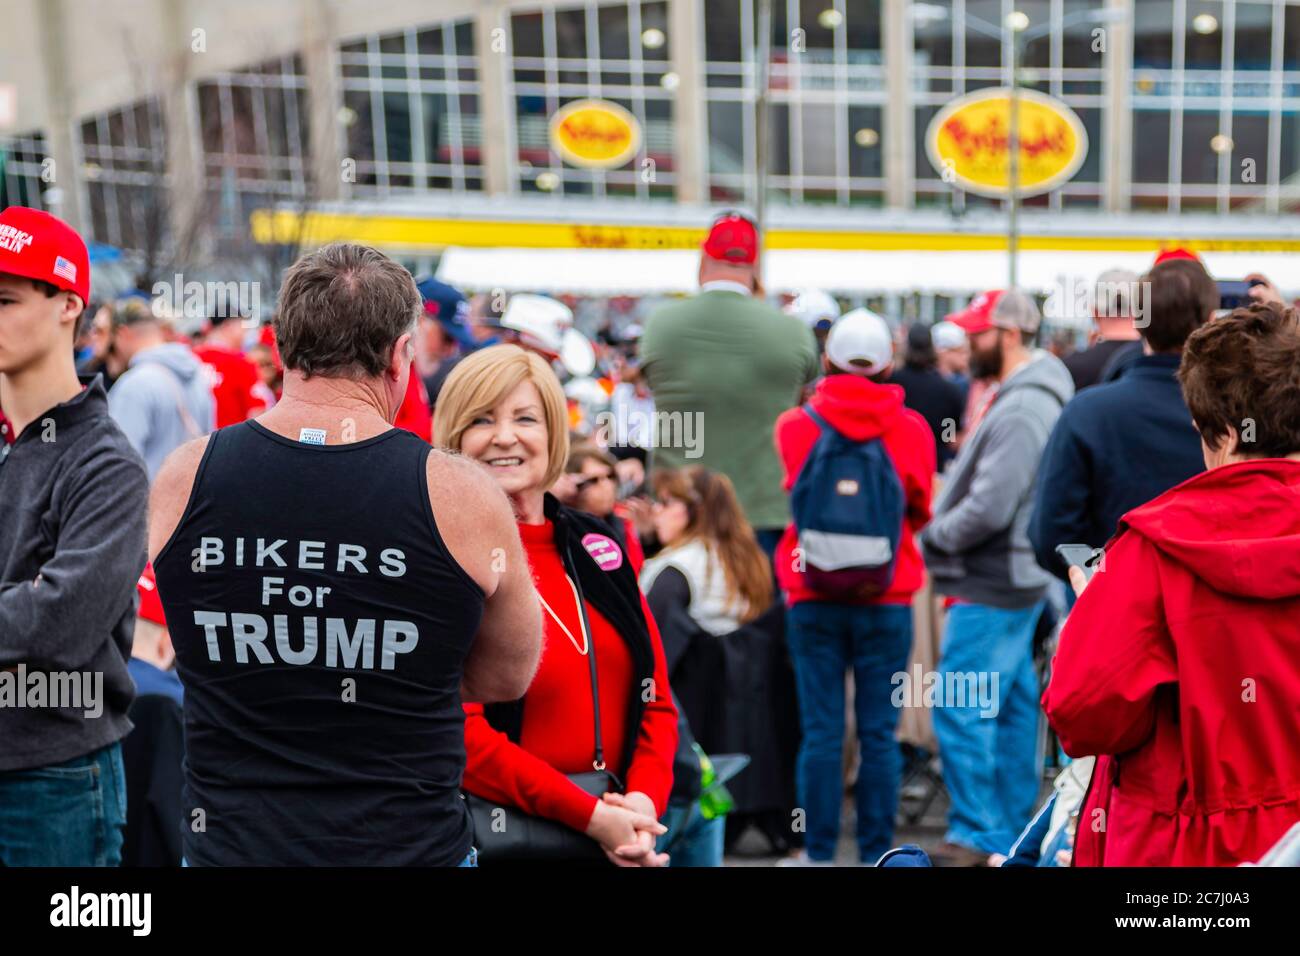 President's supporter wearing his Bikers for Trump outside the entrance to the campaign rally in Charlotte, North Carolina Stock Photo